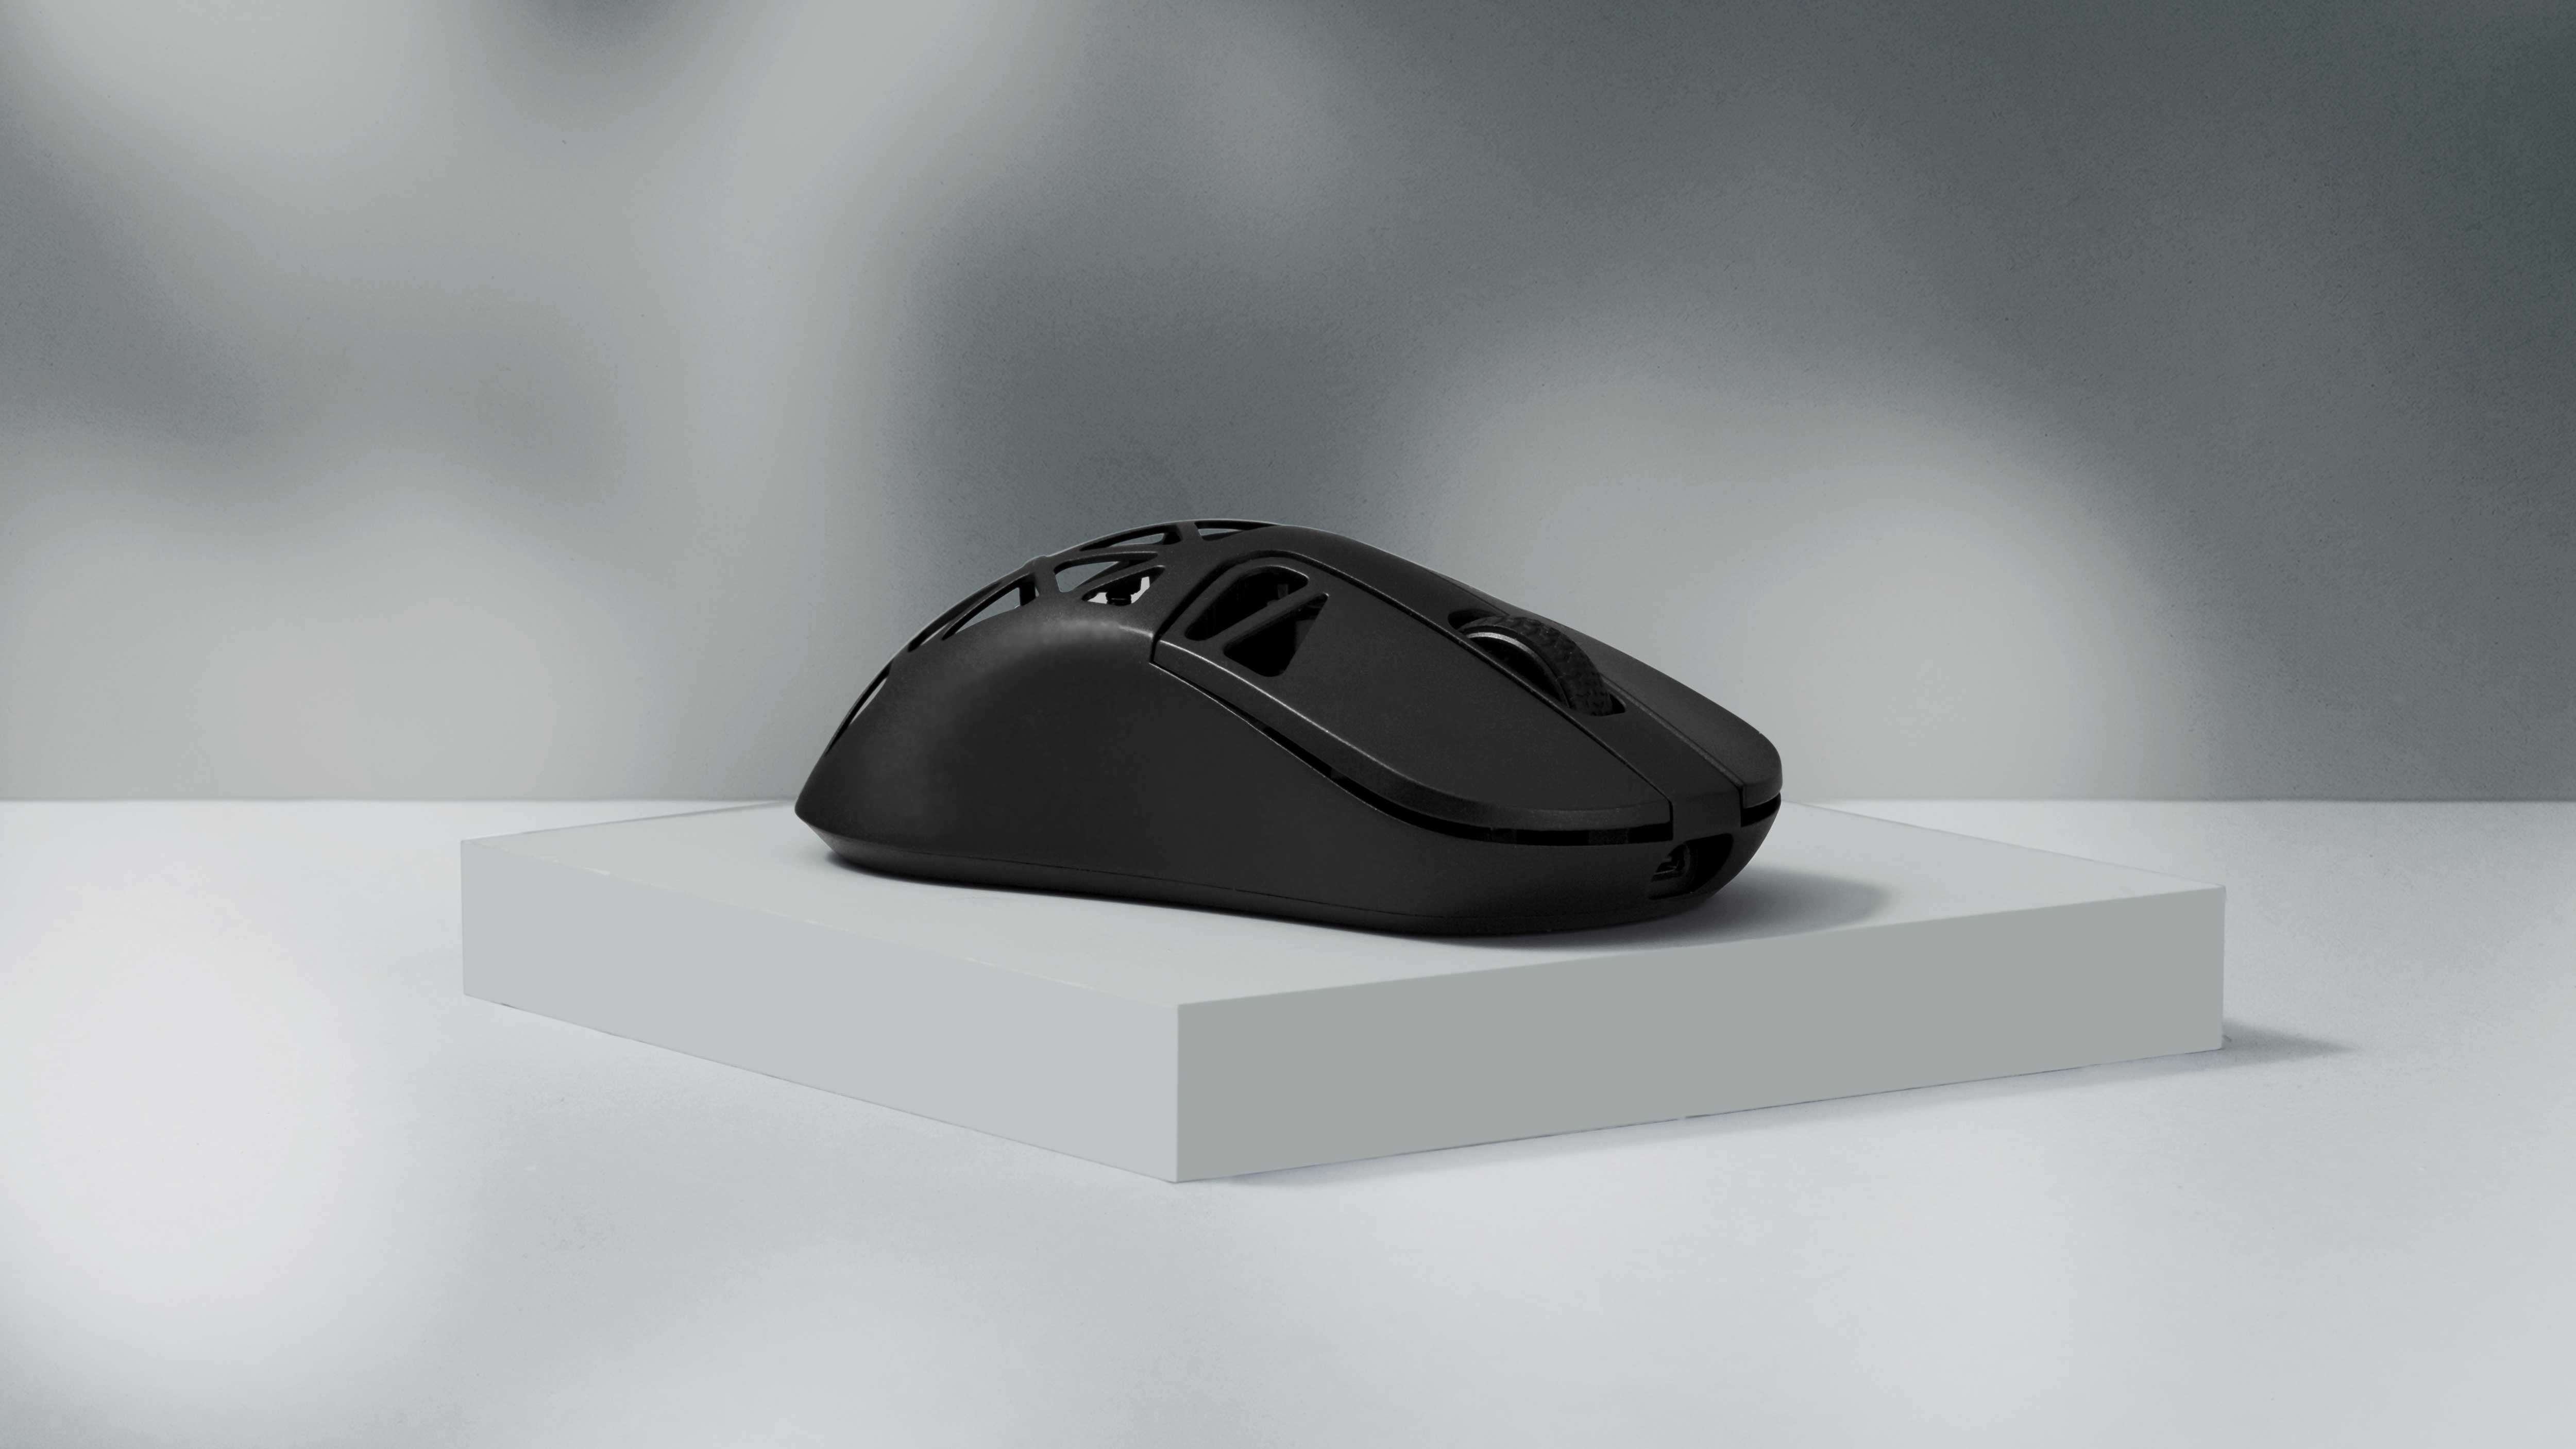 Keychron M3 MIni Wireless Optical Mouse with 4000 Hz polling rate